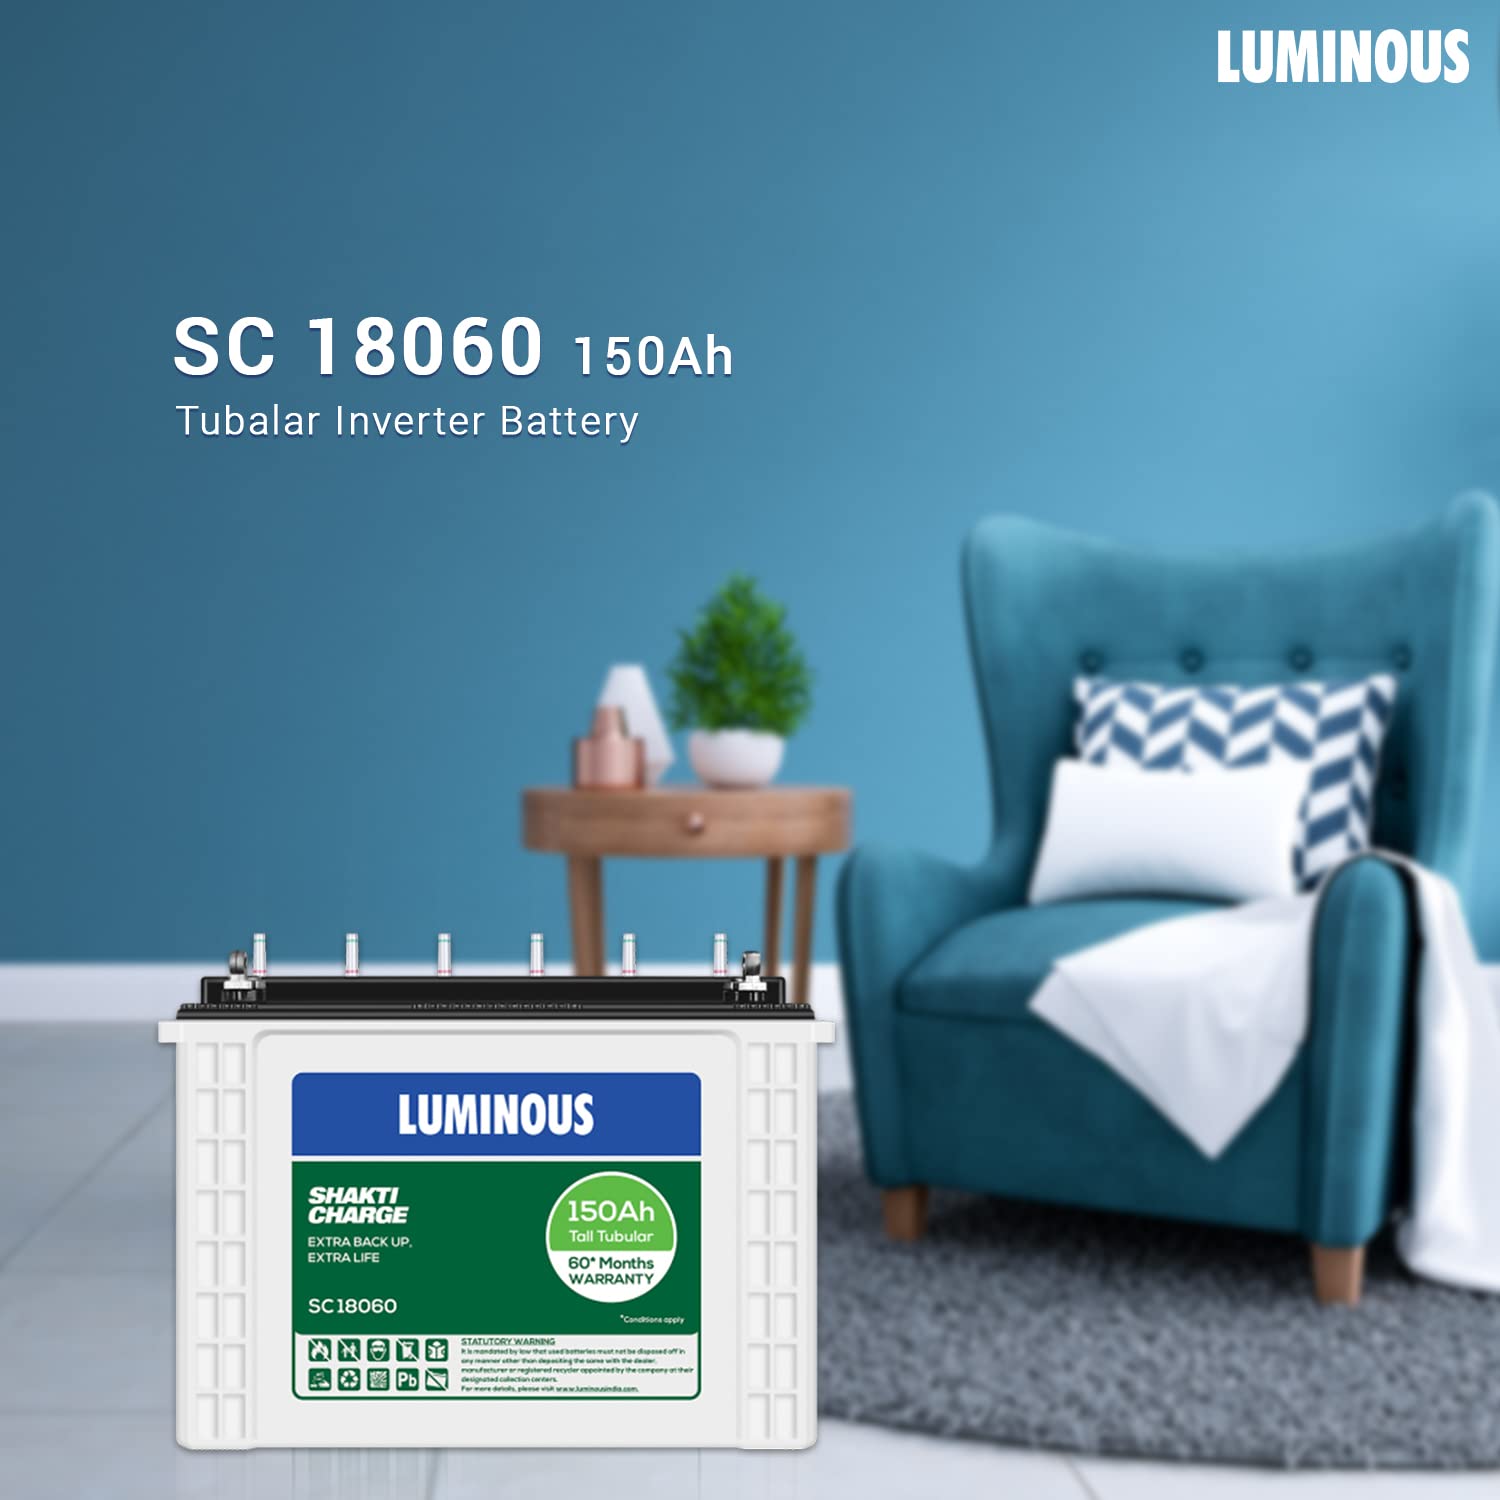 Luminous Shakti Charge SC18060 150Ah Tall Tubular Inverter Battery with 60 Months Warranty for Home, Office & Shops